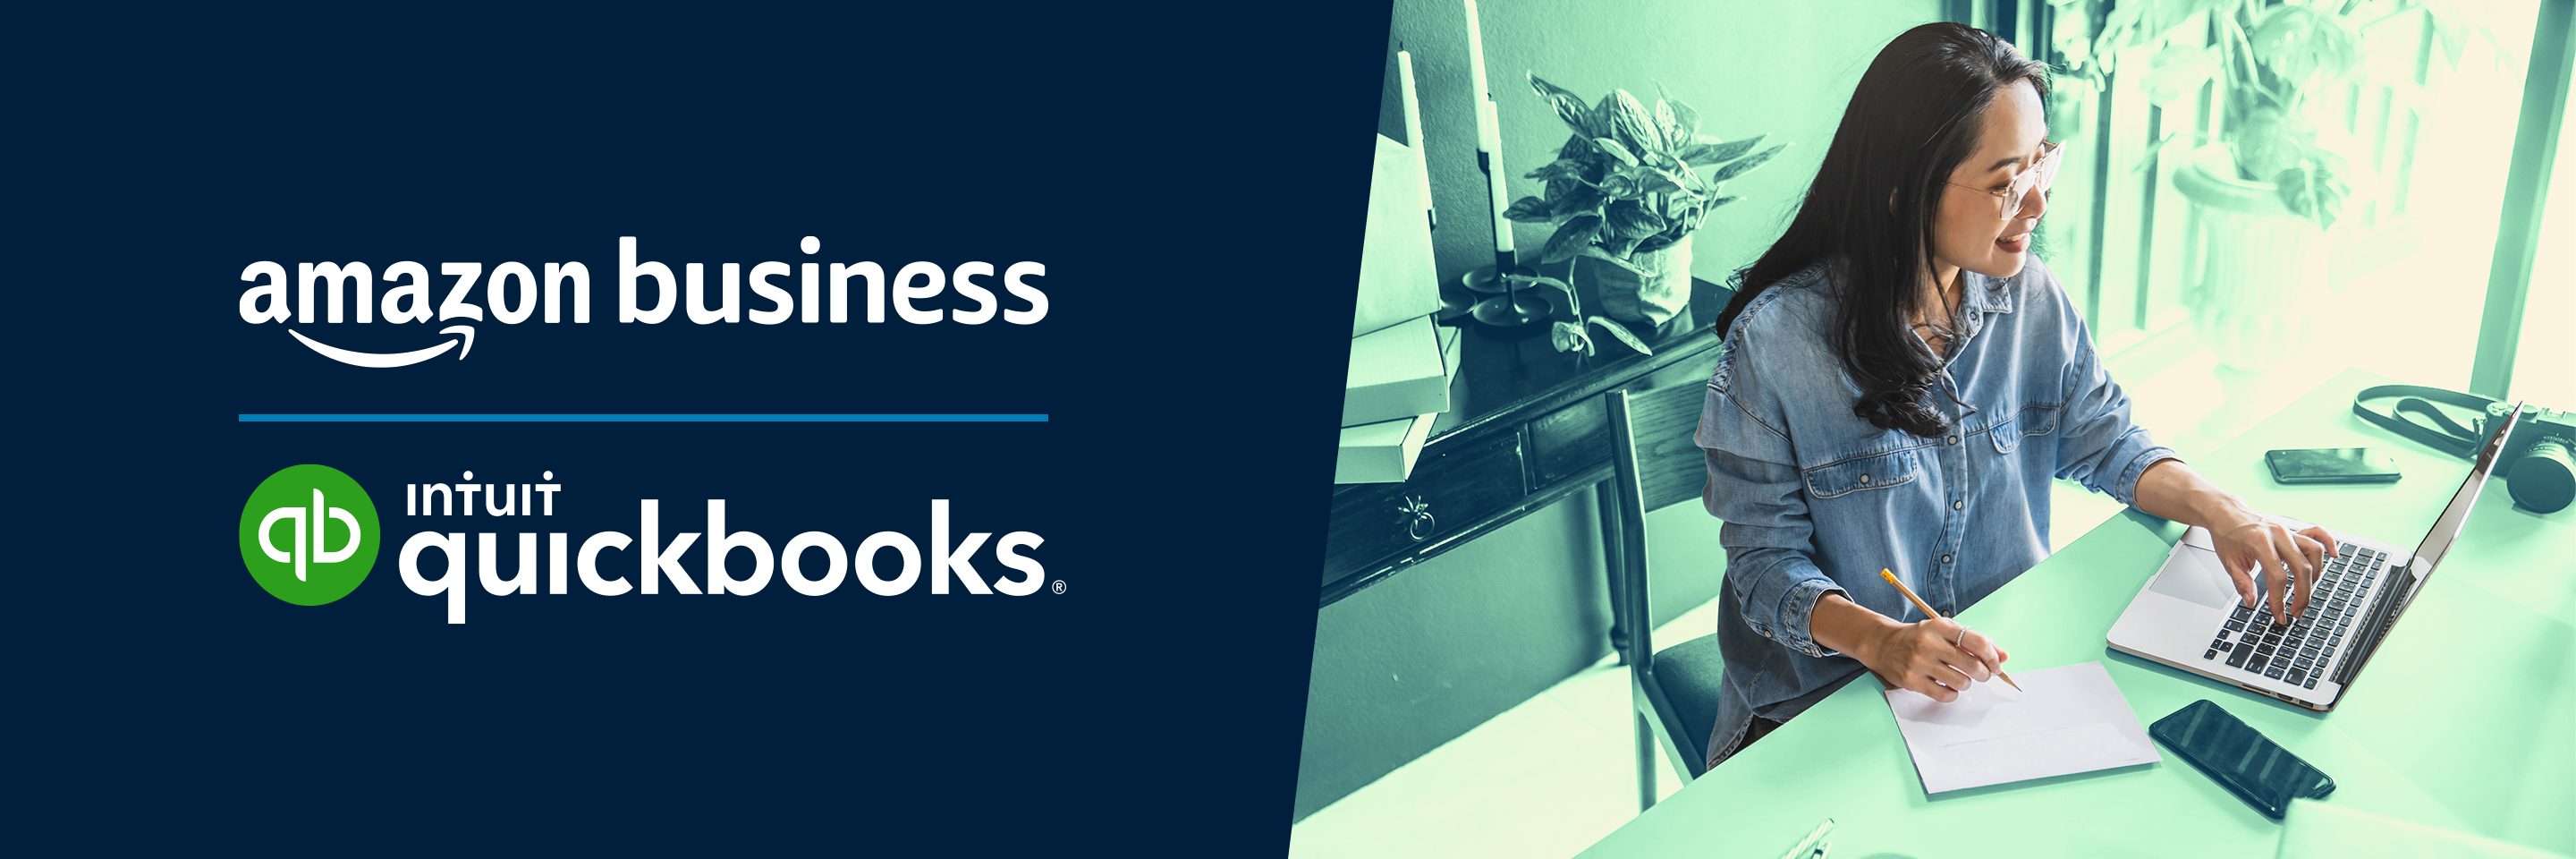 Amazon Business + Quick Books: 5 Steps to Simplify Tax Prep 